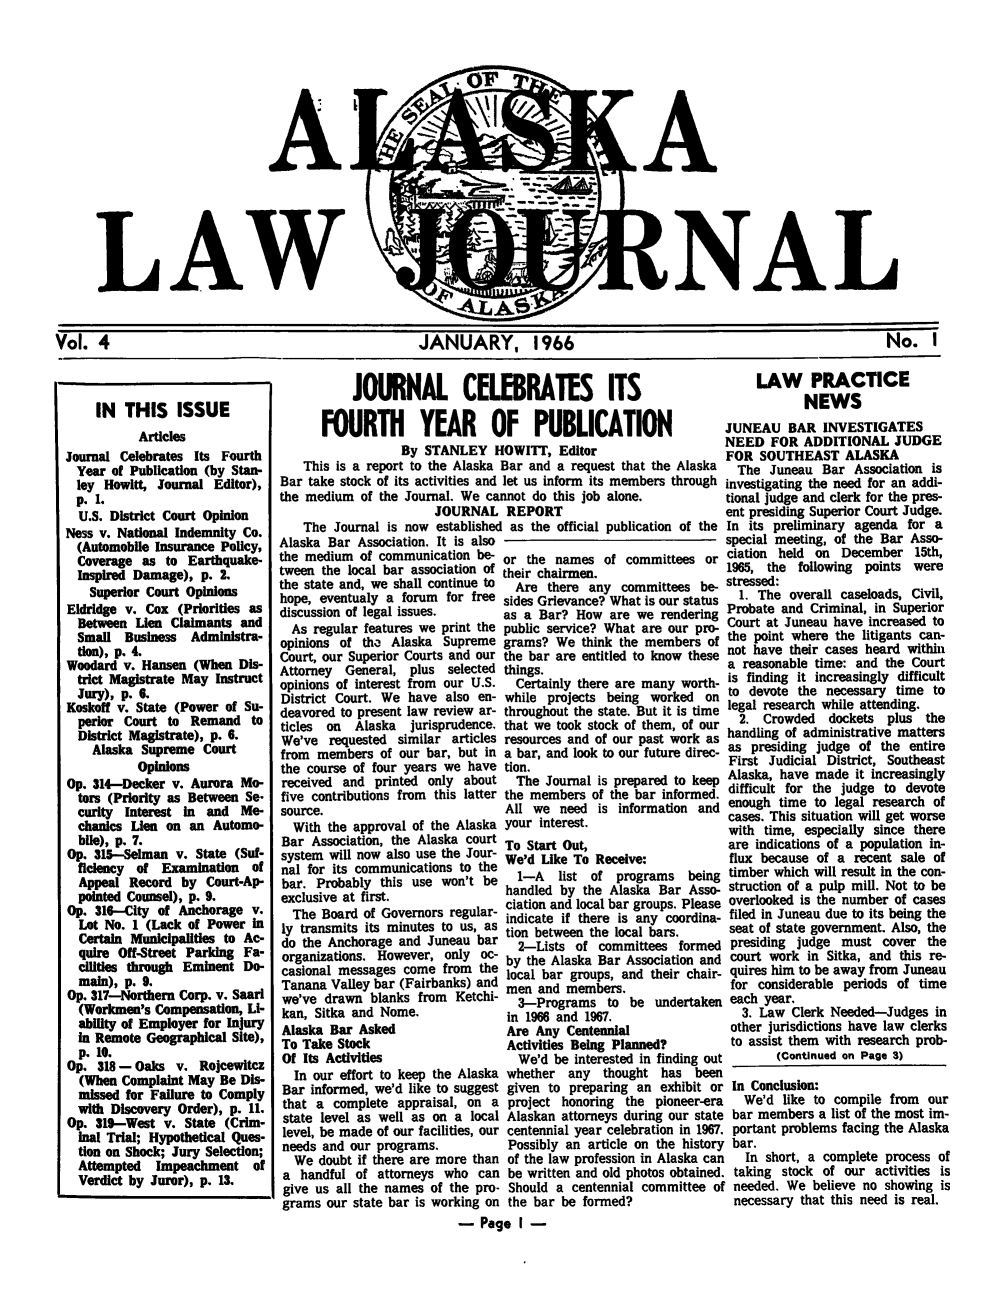 handle is hein.barjournals/alaskalj0004 and id is 1 raw text is: LAW

RY, 1966

IN THIS ISSUE
Articles
Journal Celebrates Its Fourth
Year of Publication (by Stan-
ley Howitt, Journal Editor),
p. 1.
U.S. District Court Opinion
Ness v. National Indemnity Co.
(Automobile Insurance Policy,
Coverage as to Earthquake-
Inspired Damage), p. 2.
Superior Court Opinions
Eldridge v. Cox (Priorities as
Between Lion Claimants and
Small Business Administra-
don), p. 4.
Woodard v. Hansen (When Dis-
trict Magistrate May Instruct
Jury), p. 6.
Koskoff v. State (Power of Su-
perior Court to Remand to
District Magistrate), p. 6.
Alaska Supreme Court
Opinions
Op. 314-Decker v. Aurora Mo-
tors (Priority as Between Se-
curity Interest in and Me-
chanics Lien on an Automo-
bile), p. 7.
Op. 31--Selman v. State (Suf-
ficiency of Examination of
Appeal Record by Court-Ap-
pointed Counsel), p. 9.
Op. 316-City of Anchorage v.
Lot No. 1 (Lack of Power in
Certain Municipalities to Ac-
quire Off-Street Parking Fa-
cilities through Eminent Do-
main), p. 9.
Op. 317-Northern Corp. v. Saari
(Workmen's Compensation, Li-
ability of Employer for Injury
in Remote Geographical Site),
p. 10.
Op. 318 -Oaks v. Rojcewitcz
(When Complaint May Be Dis-
missed for Failure to Comply
with Discovery Order), p. 11.
Op. 319--West v. State (Crim-
inal Trial; Hypothetical Ques-
tion on Shock; Jury Selection;
Attempted Impeachment of
Verdict by Juror), p. 13.

JOURNAL CELEBRATES ITS
FOURTH YEAR OF PUBLICATION
By STANLEY HOWITT, Editor
This is a report to the Alaska Bar and a request that the Alaska
Bar take stock of its activities and let us inform its members through
the medium of the Journal. We cannot do this job alone.
JOURNAL REPORT
The Journal is now established as the official publication of the
Alaska Bar Association. It is also
the medium of communication be-or the names of committees or
tween the local bar association of their chairmen.
the state and, we shall continue to  Are there any committees be-
hope, eventualy a forum for free sides Grievance? What is our status
discussion of legal issues.     as a Bar? How are we rendering
As regular features we print the public service? What are our pro-
opinions of tha Alaska Supreme grams? We think the members of
Court, our Superior Courts and our the bar are entitled to know these
Attorney General, plus selected things.
opinions of interest from our U.S.  Certainly there are many worth-
District Court. We have also en- while projects being worked on
deavored to present law review ar- throughout the state. But it is time
ticles on Alaska jurisprudence, that we took stock of them, of our
We've requested similar articles resources and of our past work as
from members of our bar, but in a bar, and look to our future direc-
the course of four years we have tion.
received and printed only about The Journal is prepared to keep
five contributions from this latter the members of the bar informed.
source.                         All we need is information and
With the approval of the Alaska your interest.
Bar Association, the Alaska court To Start Out,
system will now also use the Jour- We'd Like To Receive:
nal for its communications to the
bar. Probably this use won't be   1-A  list of programs being
exclusive at first,             handled by the Alaska Bar Asso-
The Board of Governors regular- ciation and local bar groups. Please
indicate if there is any coordina-
ly transmits its minutes to us, as inbteen the loca bar
do the Anchorage and Juneau bar tion between the local bars.
2-Lists of committees formed
organizations. However, only Oc- by the Alaska Bar Association and
casional messages come from the local bar groups, and their chair-
Tanana Valley bar (Fairbanks) and men and members.
we've drawn blanks from Ketchi-   3-Programs to be undertaken
kan, Sitka and Nome.            in 1966 and 1967.
Alaska Bar Asked                Are Any Centennial
To Take Stock                   Activities Being Planned?
Of Its Activities                 We'd be interested in finding out
In our effort to keep the Alaska whether any thought has been
Bar informed, we'd like to suggest given to preparing an exhibit or
that a complete appraisal, on a project honoring the pioneer-era
state level as well as on a local Alaskan attorneys during our state
level, be made of our facilities, our centennial year celebration in 1967.
needs and our programs.         Possibly an article on the history
We doubt if there are more than of the law profession in Alaska can
a handful of attorneys who can be written and old photos obtained.
give us all the names of the pro- Should a centennial committee of
grams our state bar is working on the bar be formed?
- Page I -

LAW PRACTICE
NEWS
JUNEAU BAR INVESTIGATES
NEED FOR ADDITIONAL JUDGE
FOR SOUTHEAST ALASKA
The Juneau Bar Association is
nvestigating the need for an addi-
tional judge and clerk for the pres-
ent presiding Superior Court Judge.
In its preliminary agenda for a
special meeting, of the Bar Asso-
ciation held on December 15th,
1965, the following points were
stressed:
1. The overall caseloads, Civil,
Probate and Criminal, in Superior
Court at Juneau have increased to
the point where the litigants can-
not have their cases heard within
a reasonable time: and the Court
is finding it increasingly difficult
to devote the necessary time to
legal research while attending.
2. Crowded dockets plus the
handling of administrative matters
as presiding judge of the entire
First Judicial District, Southeast
Alaska, have made it increasingly
difficult for the judge to devote
enough time to legal research of
cases. This situation will get worse
with time, especially since there
are indications of a population in-
flux because of a recent sale of
timber which will result in the con-
struction of a pulp mill. Not to be
overlooked is the number of cases
filed in Juneau due to its being the
seat of state government. Also, the
presiding judge must cover the
court work in Sitka, and this re-
quires him to be away from Juneau
for considerable periods of time
each year.
3. Law Clerk Needed-Judges in
other jurisdictions have law clerks
to assist them with research prob-
(Continued on Page 3)
In Conclusion:
We'd like to compile from our
bar members a list of the most im-
portant problems facing the Alaska
bar.
In short, a complete process of
taking stock of our activities is
needed. We believe no showing is
necessary that this need is real.

|O. 1


